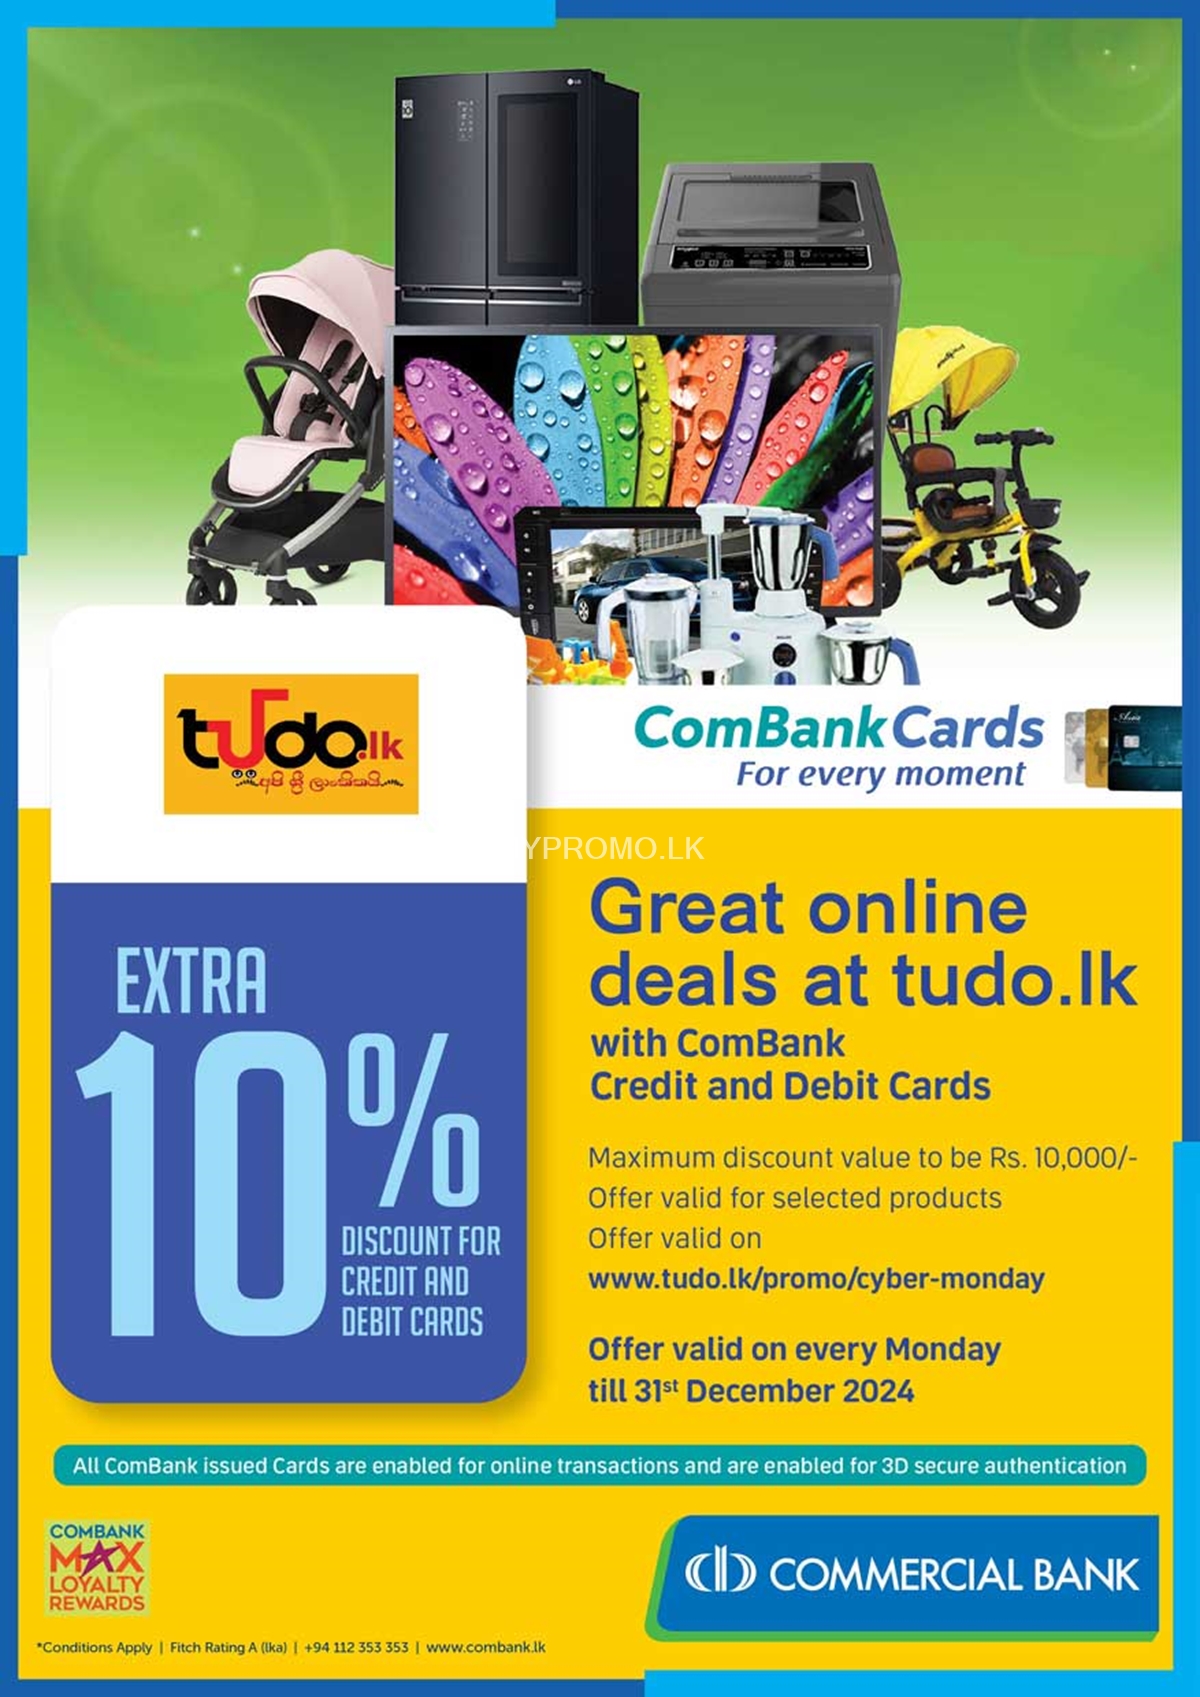 Get extra 10% discount at TUDO.lk with Commercial Bank Cards